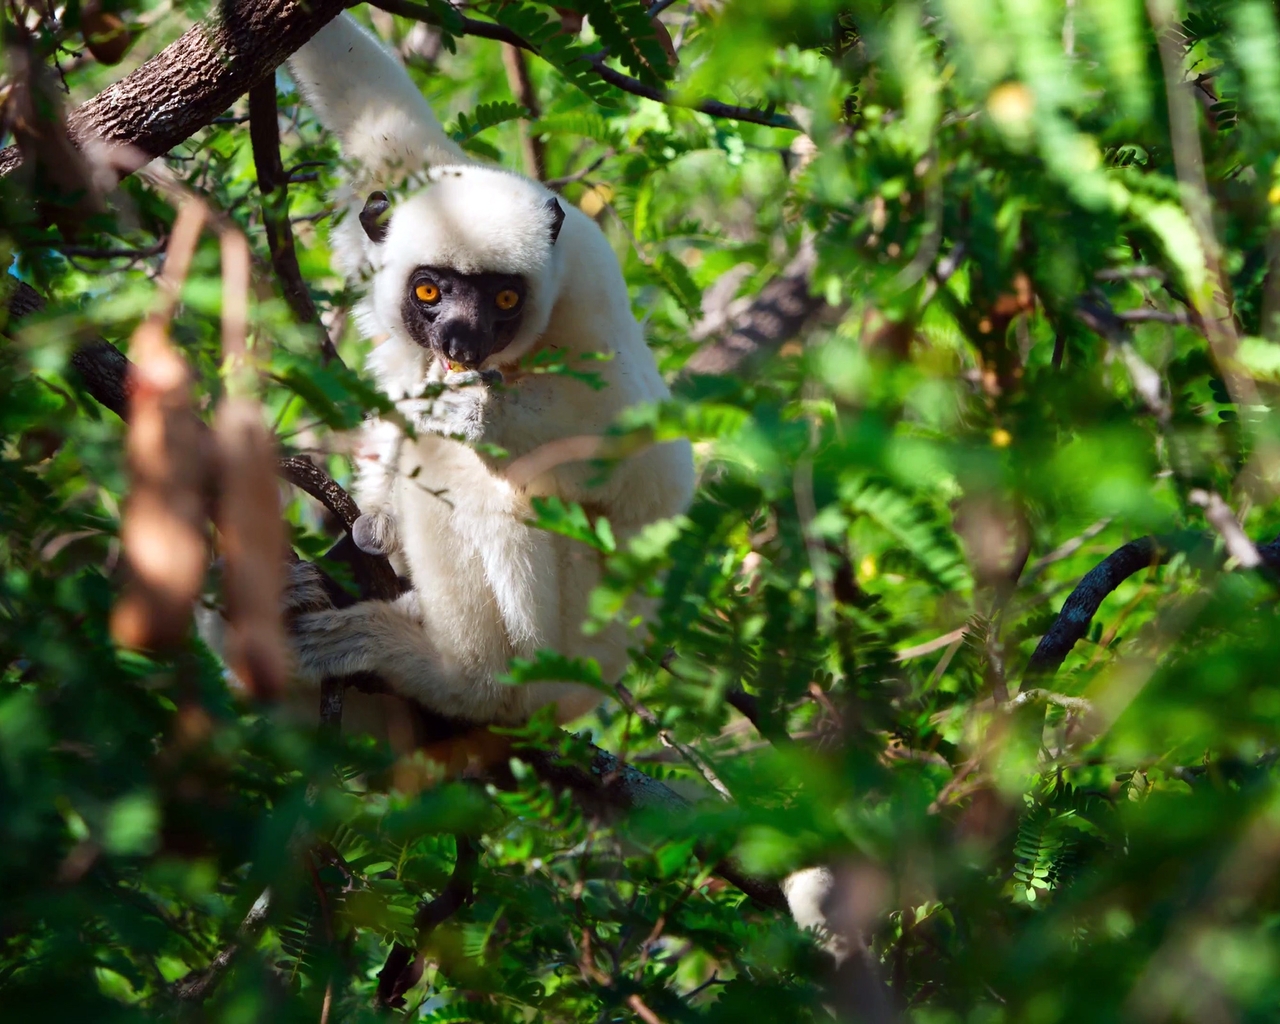 Image: Lemur, white, branches, greenery, leaves, nature